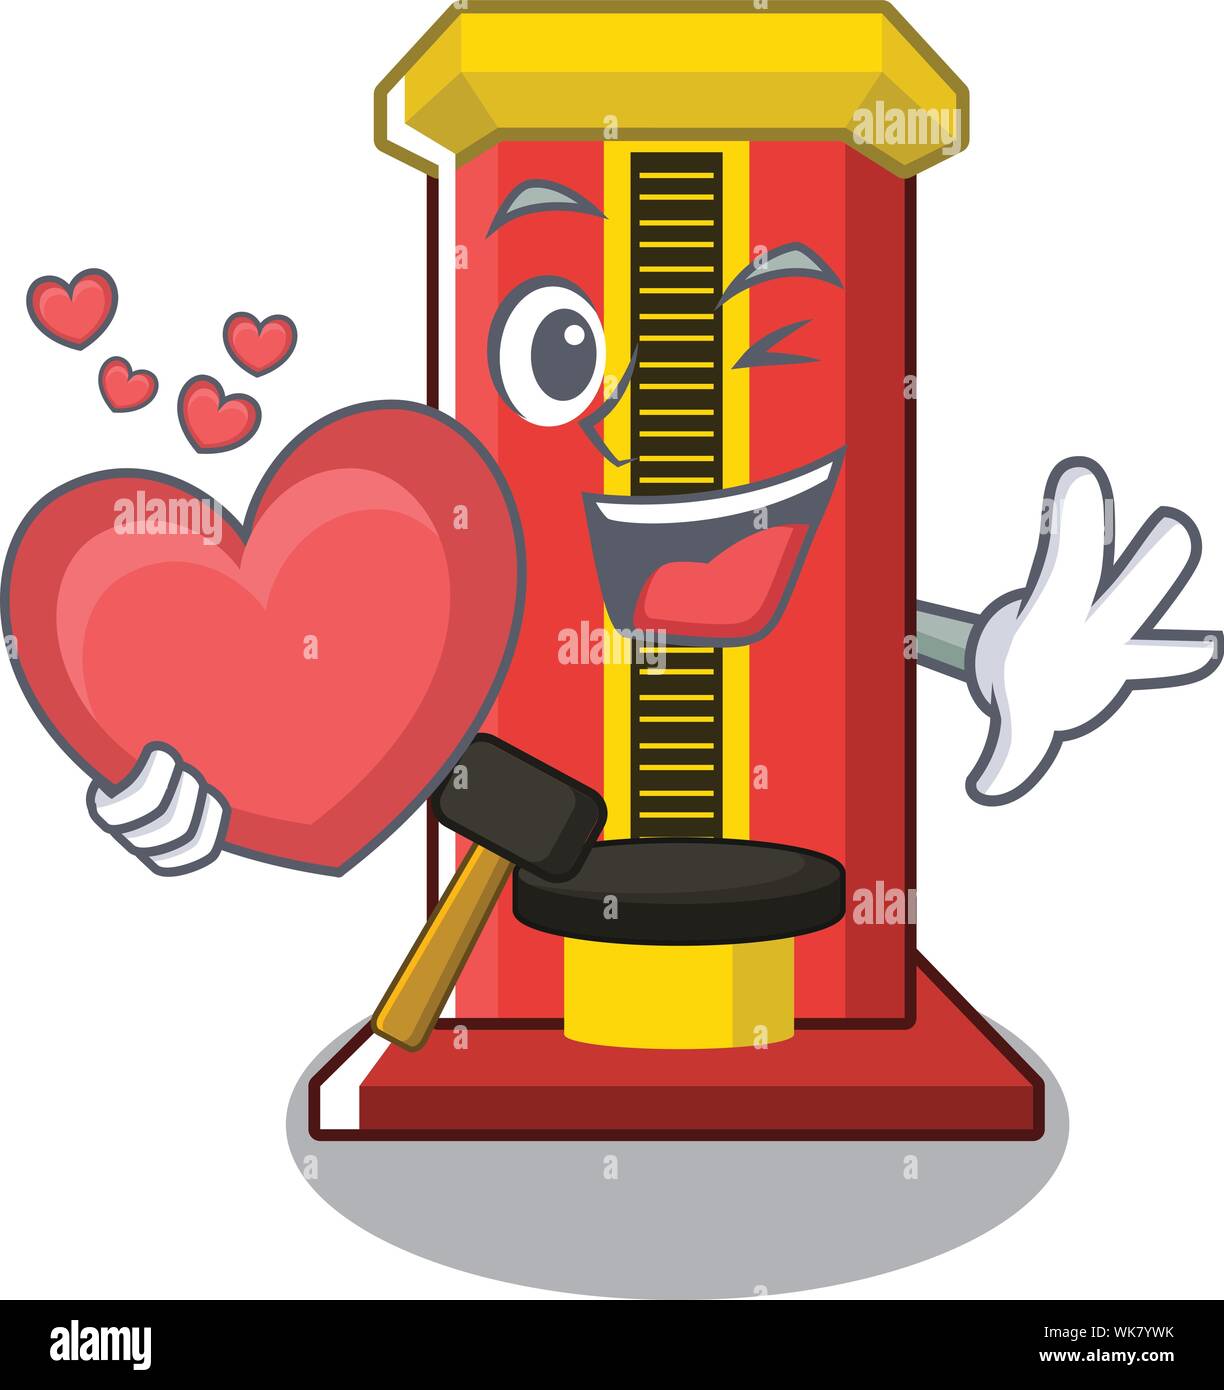 With heart hammer game machine isolated in character Stock Vector